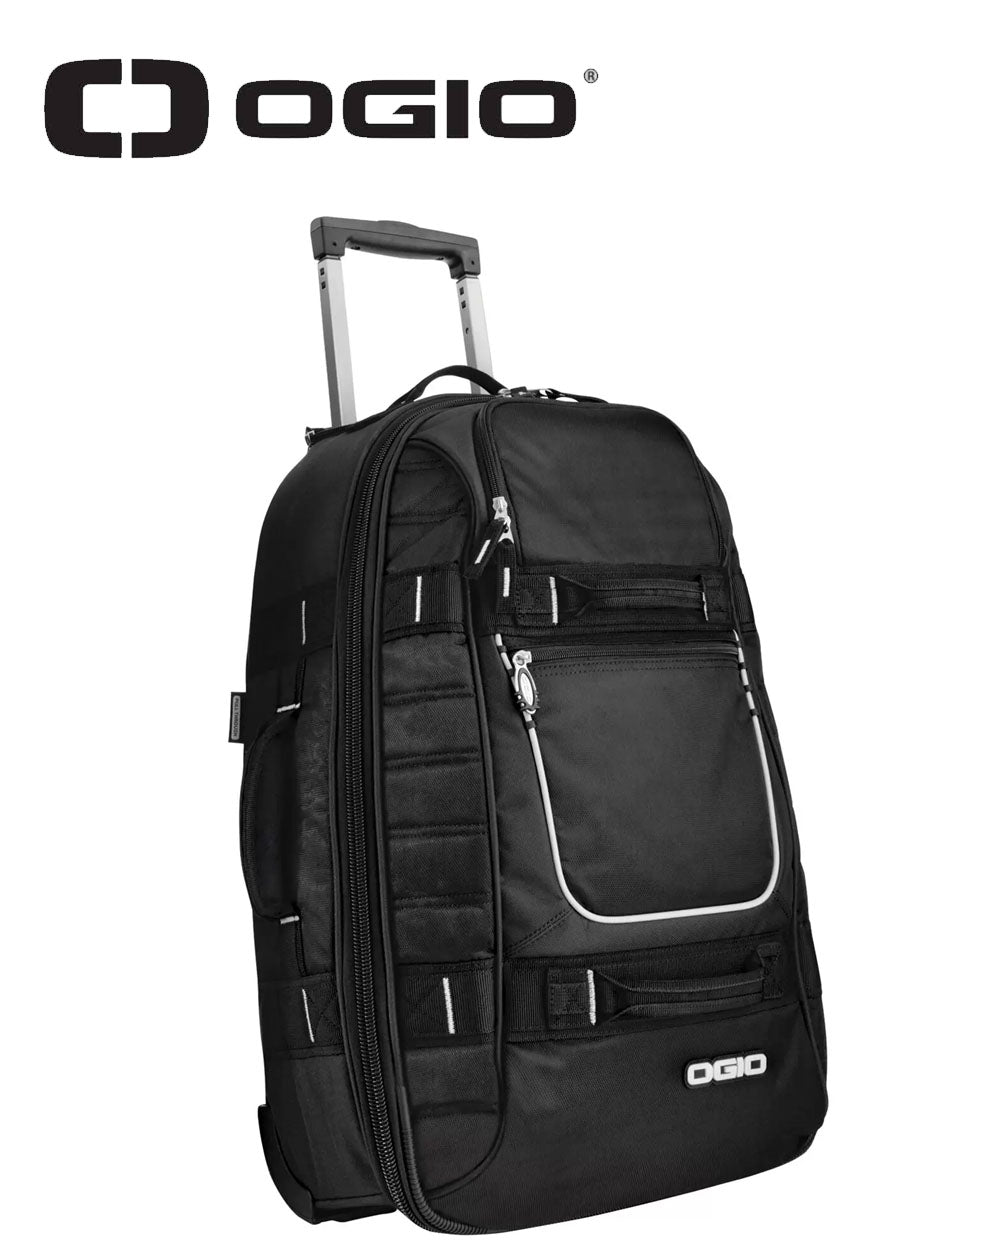 OGIO 22 Inch Pull Through Carry On Luggage